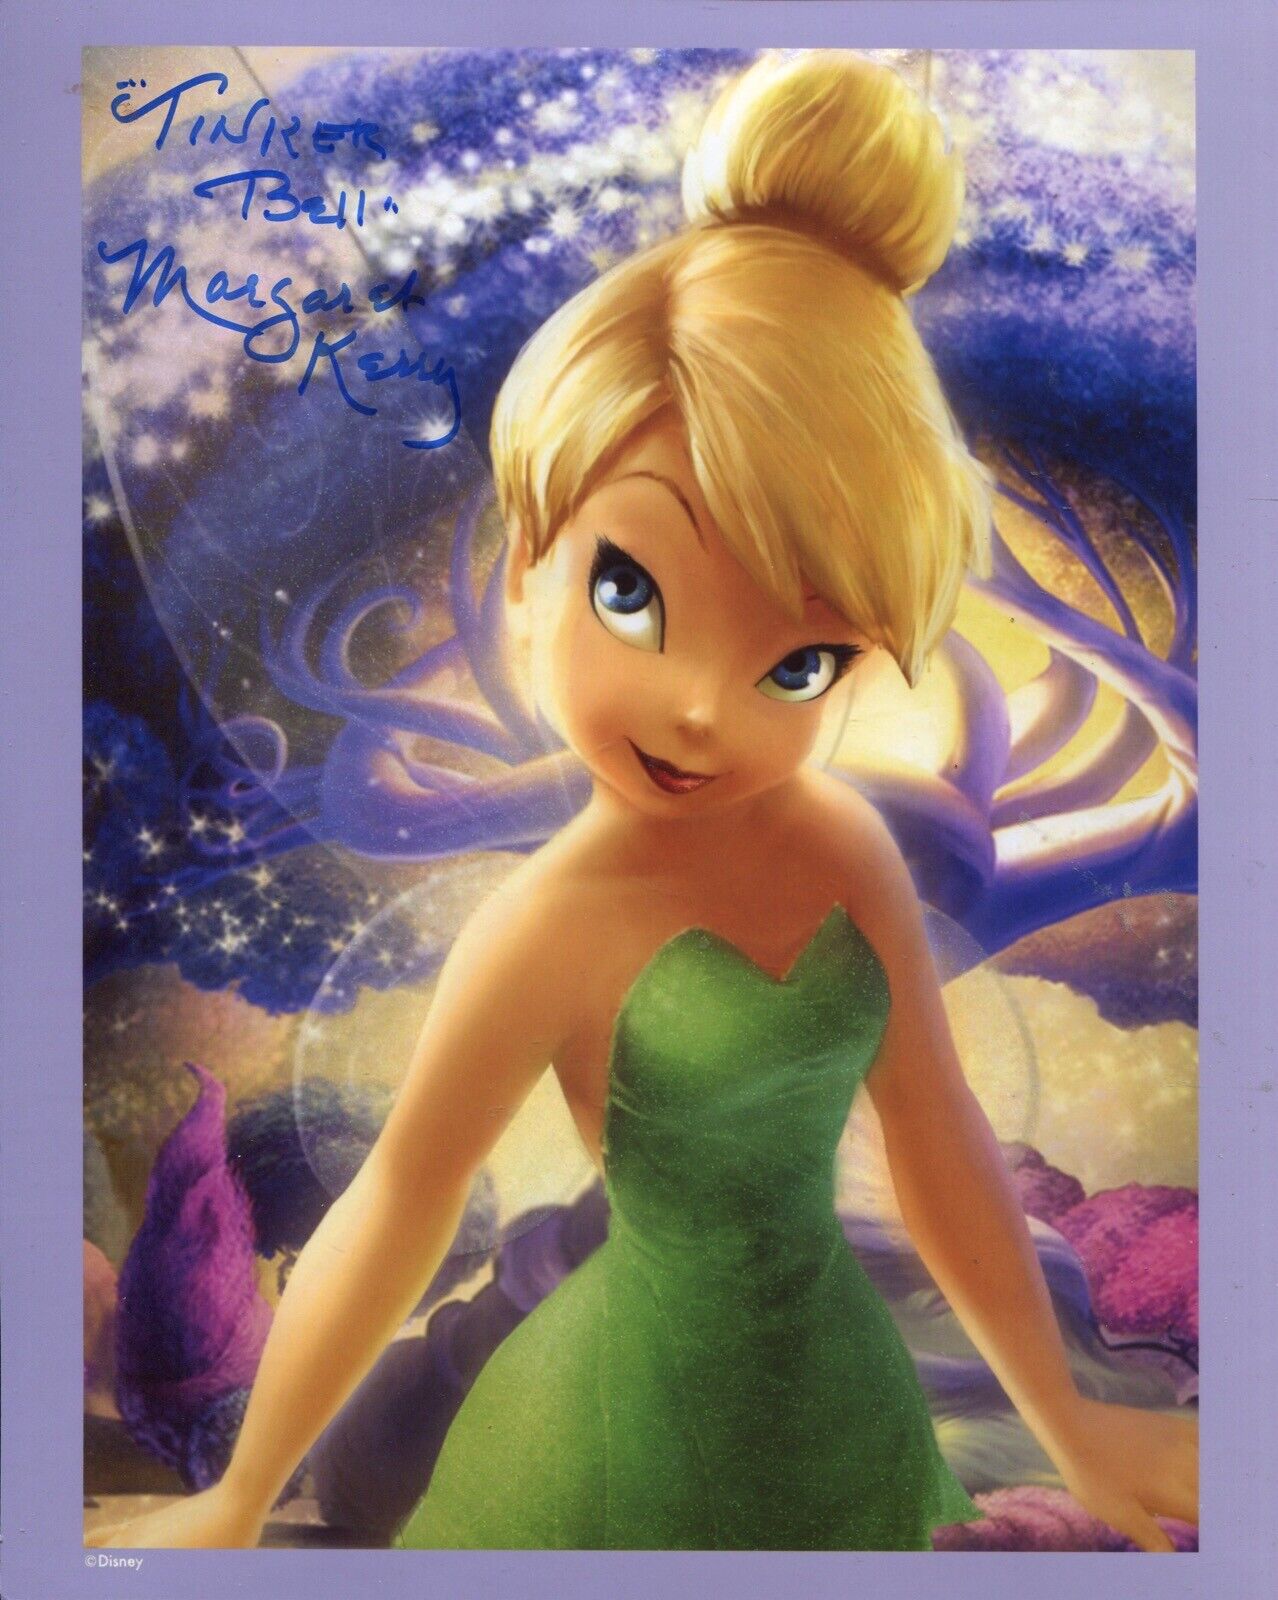 Margaret Kerry as Tinker Bell signed PETER PAN movie Photo Poster painting No2 - UACC DEALER